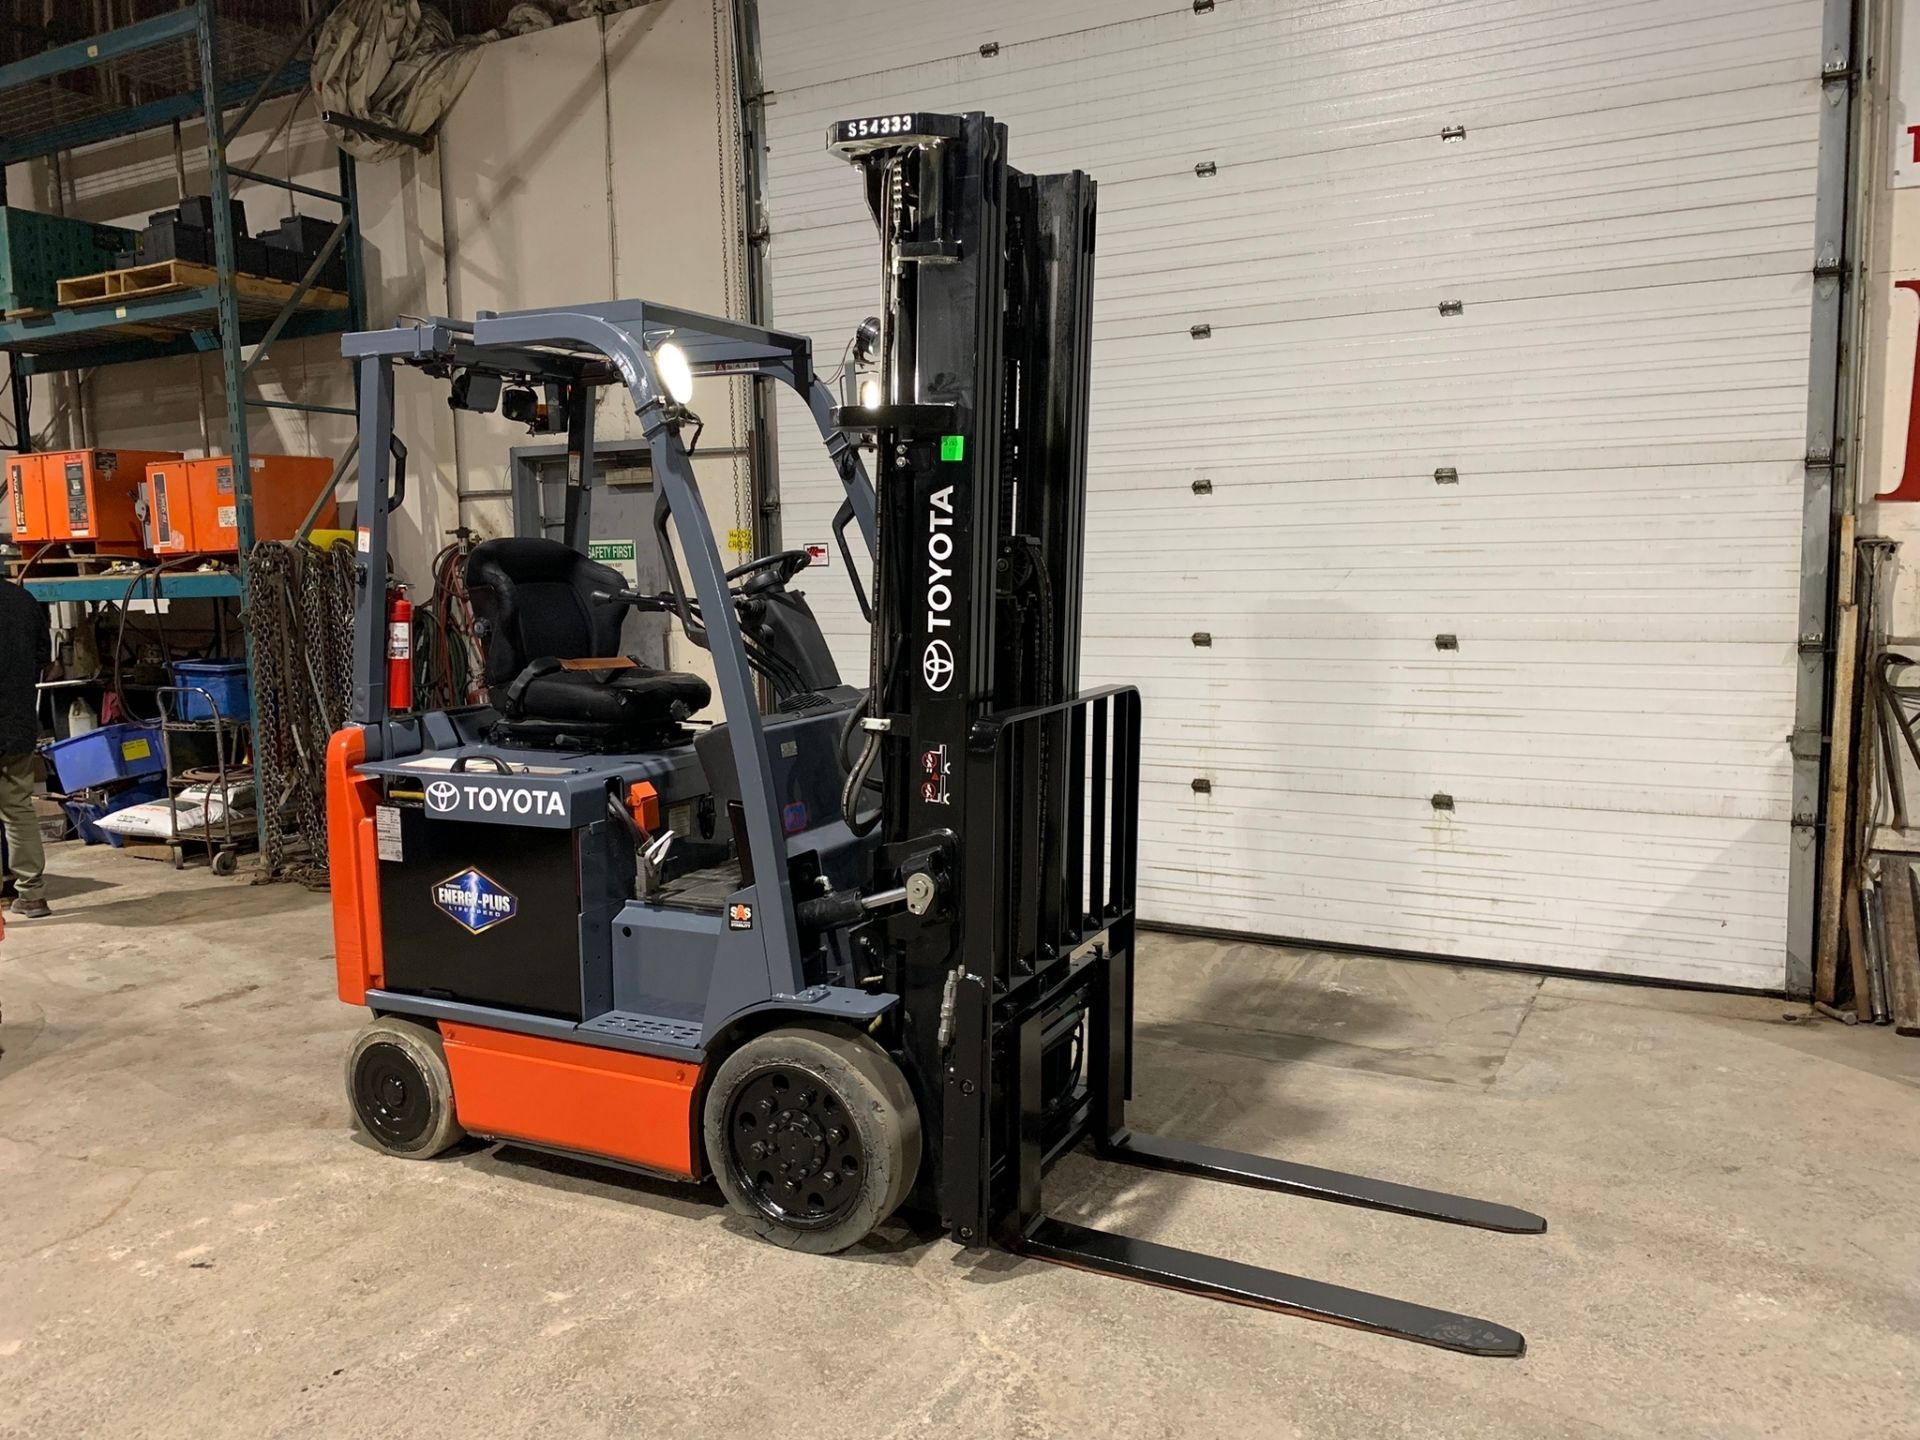 ***NICE Toyota 25 - 5,000lbs Capacity Forklift Electric with Sideshift 3-stage mast 48V - FREE - Image 4 of 6